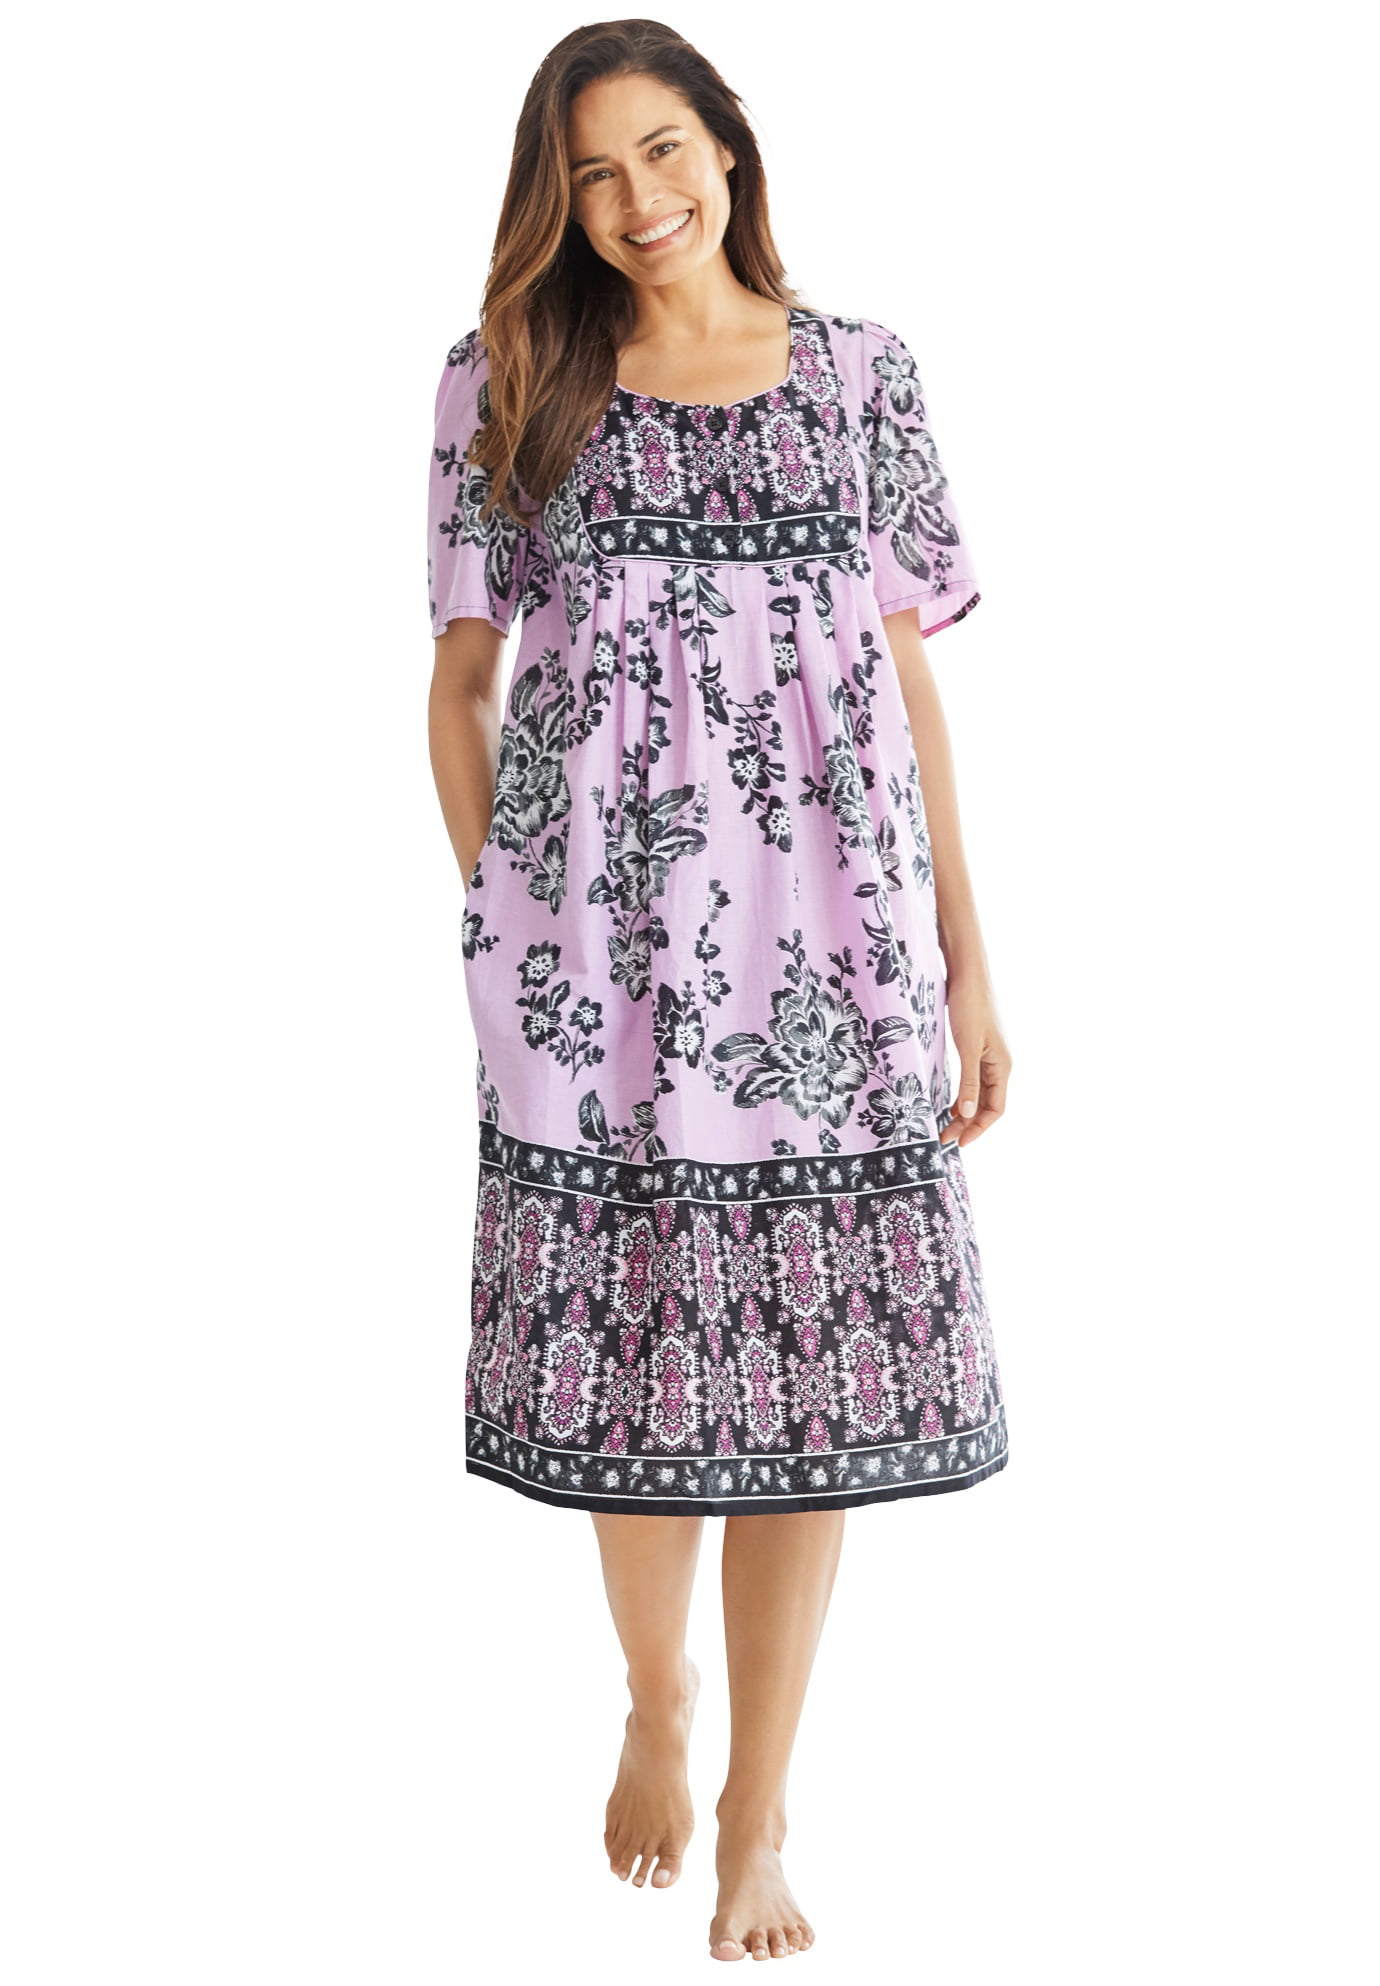 Only Necessities Women's Plus Size Mixed Print Short Lounger House Dress or Nightgown 